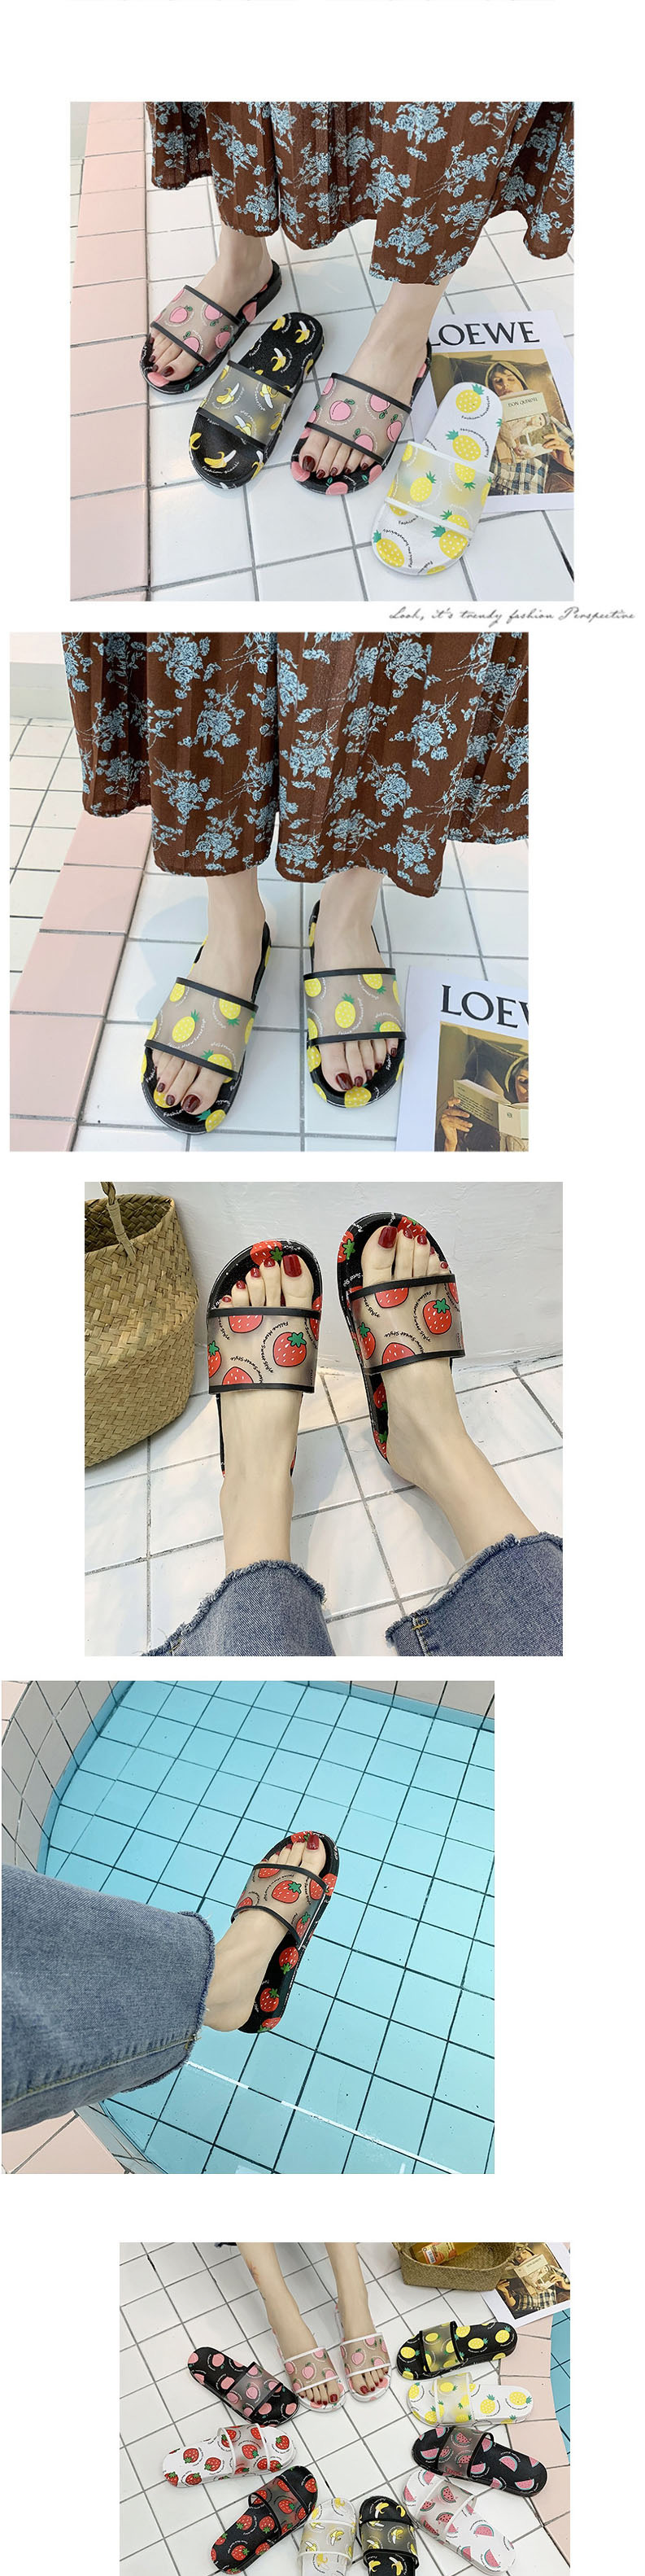 Fashion Strawberry With Black Fruit Fruit Sandals,Slippers